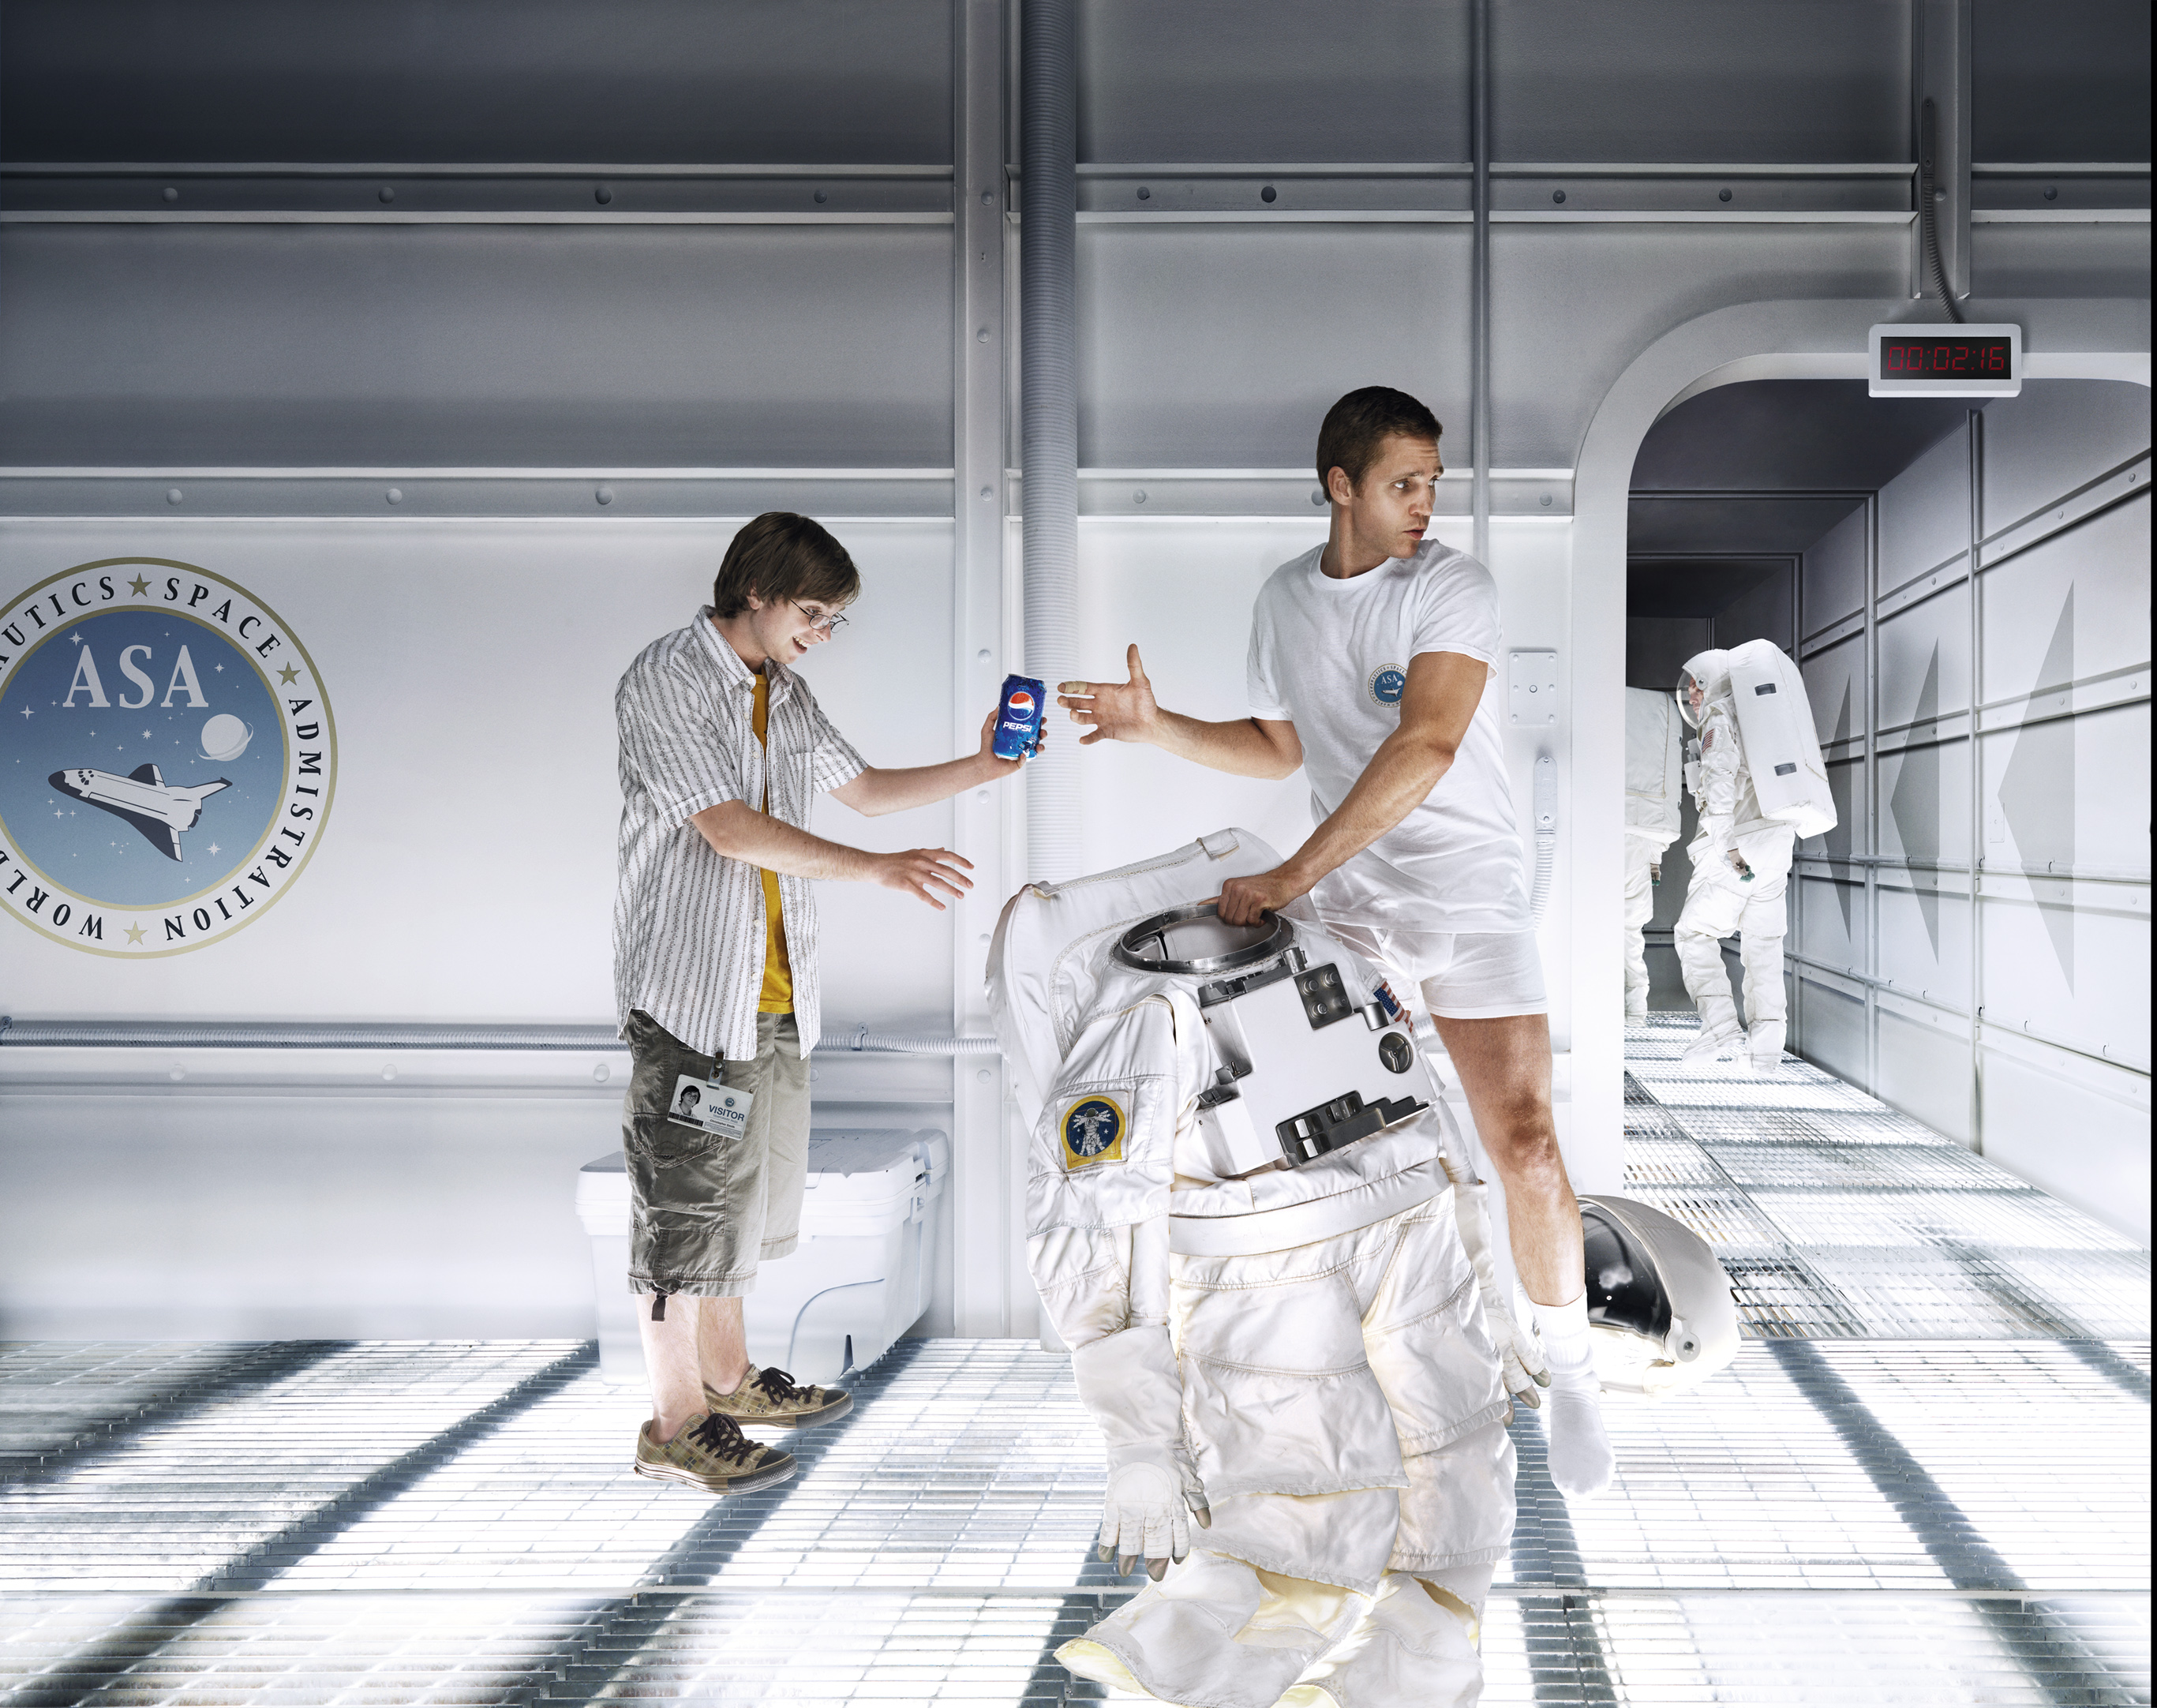 André Brooks as astronaut in PEPSI commercial.